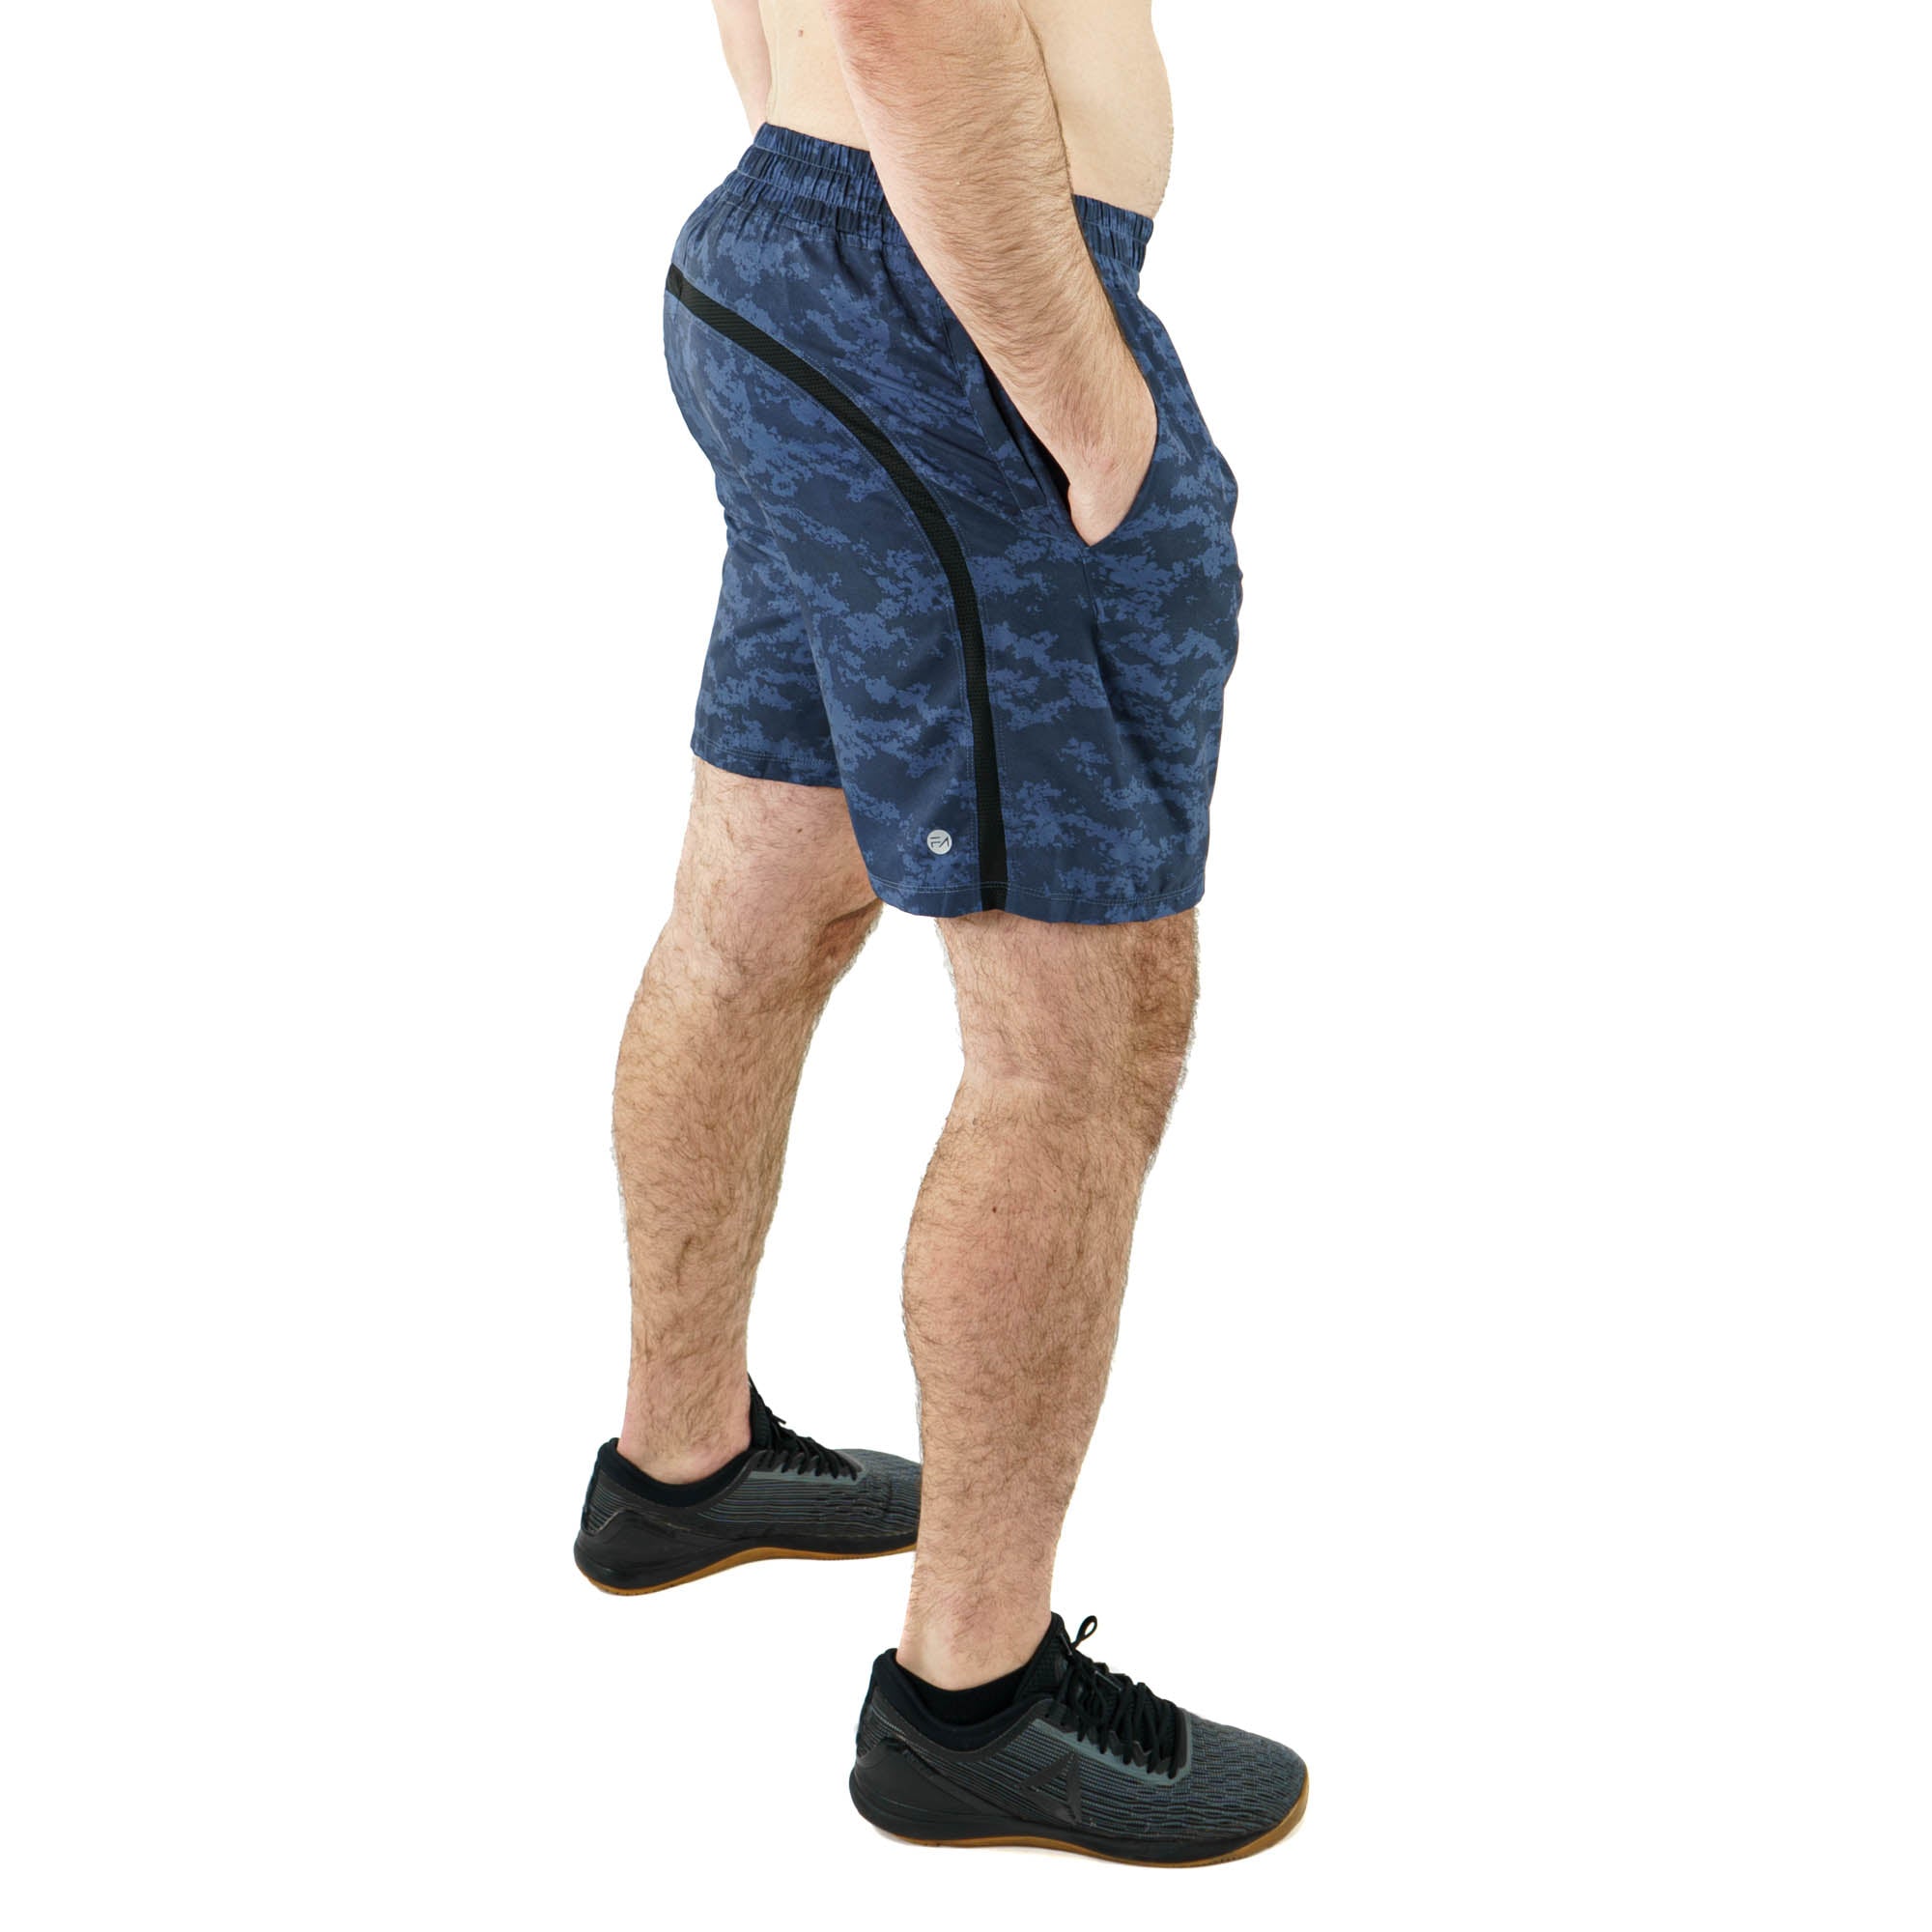 Unlimited Shorts Blue Camo (7.5")